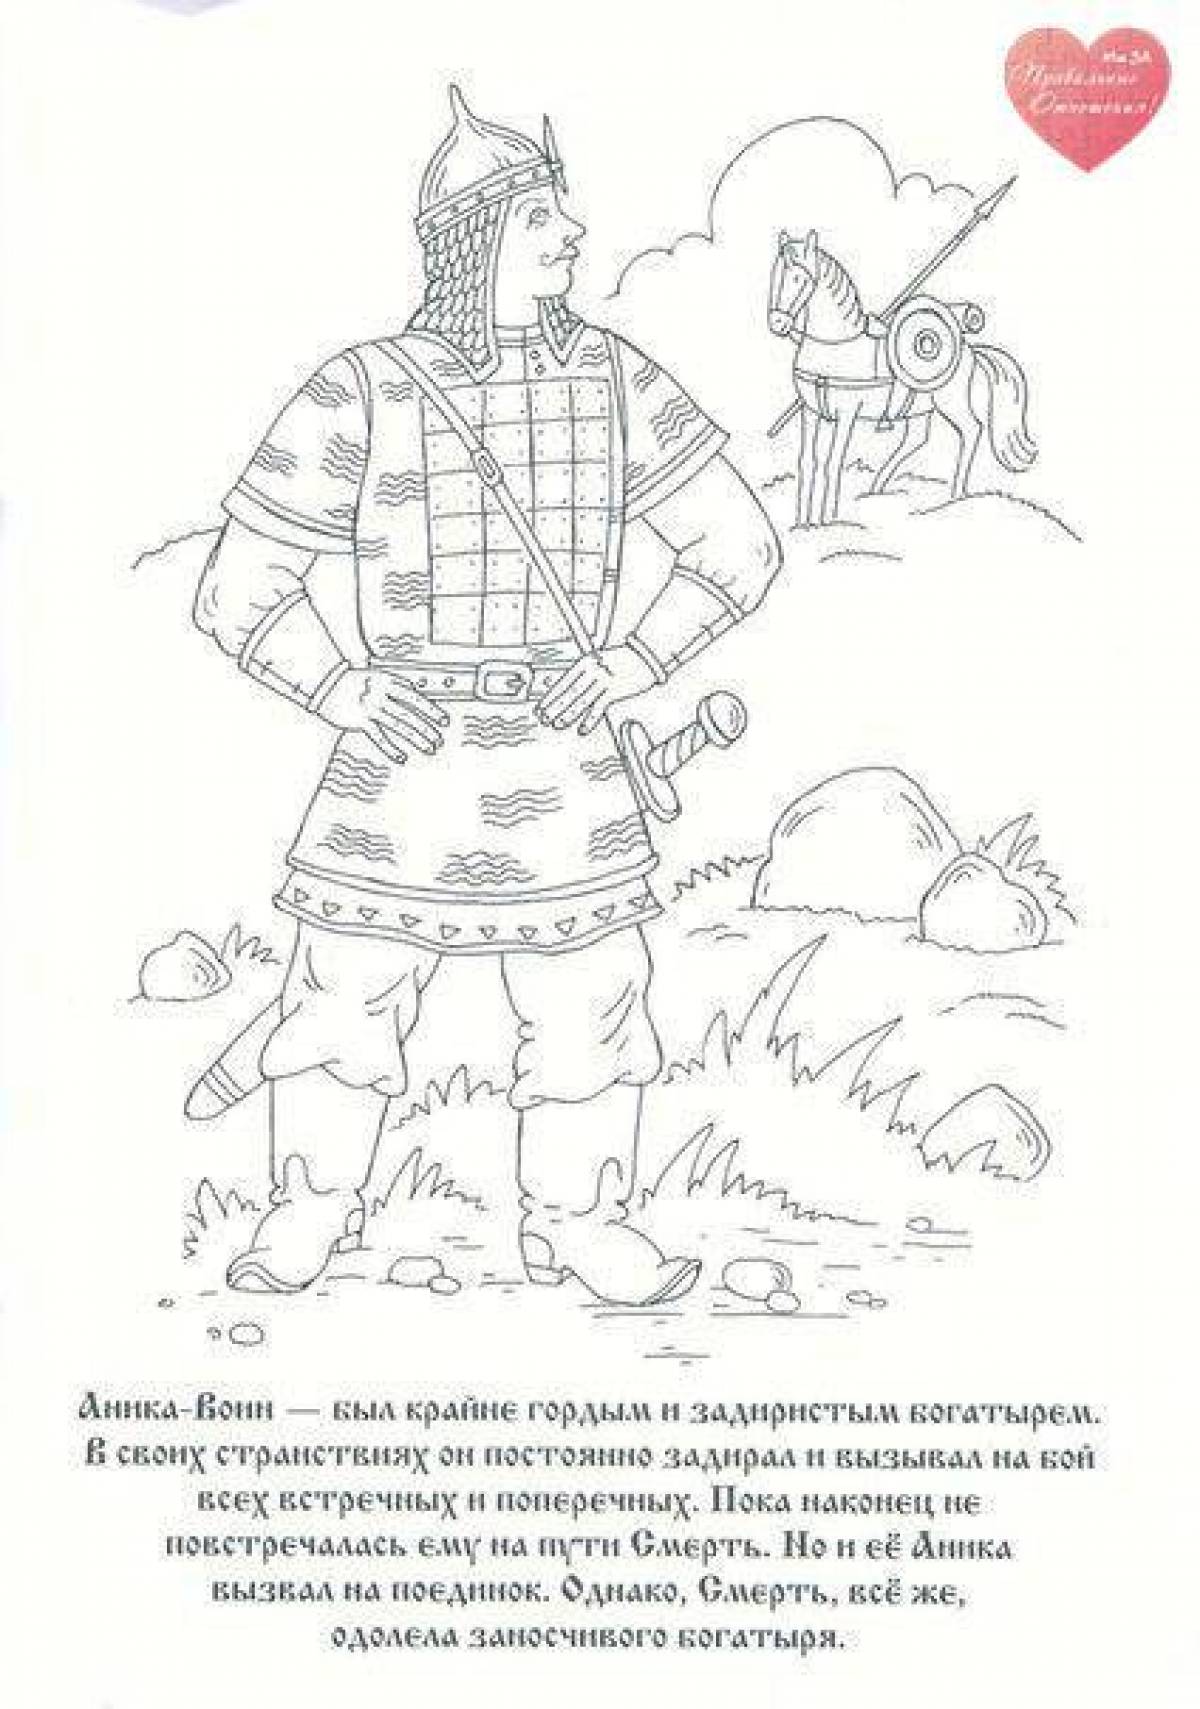 Coloring pages of Russian heroes for children